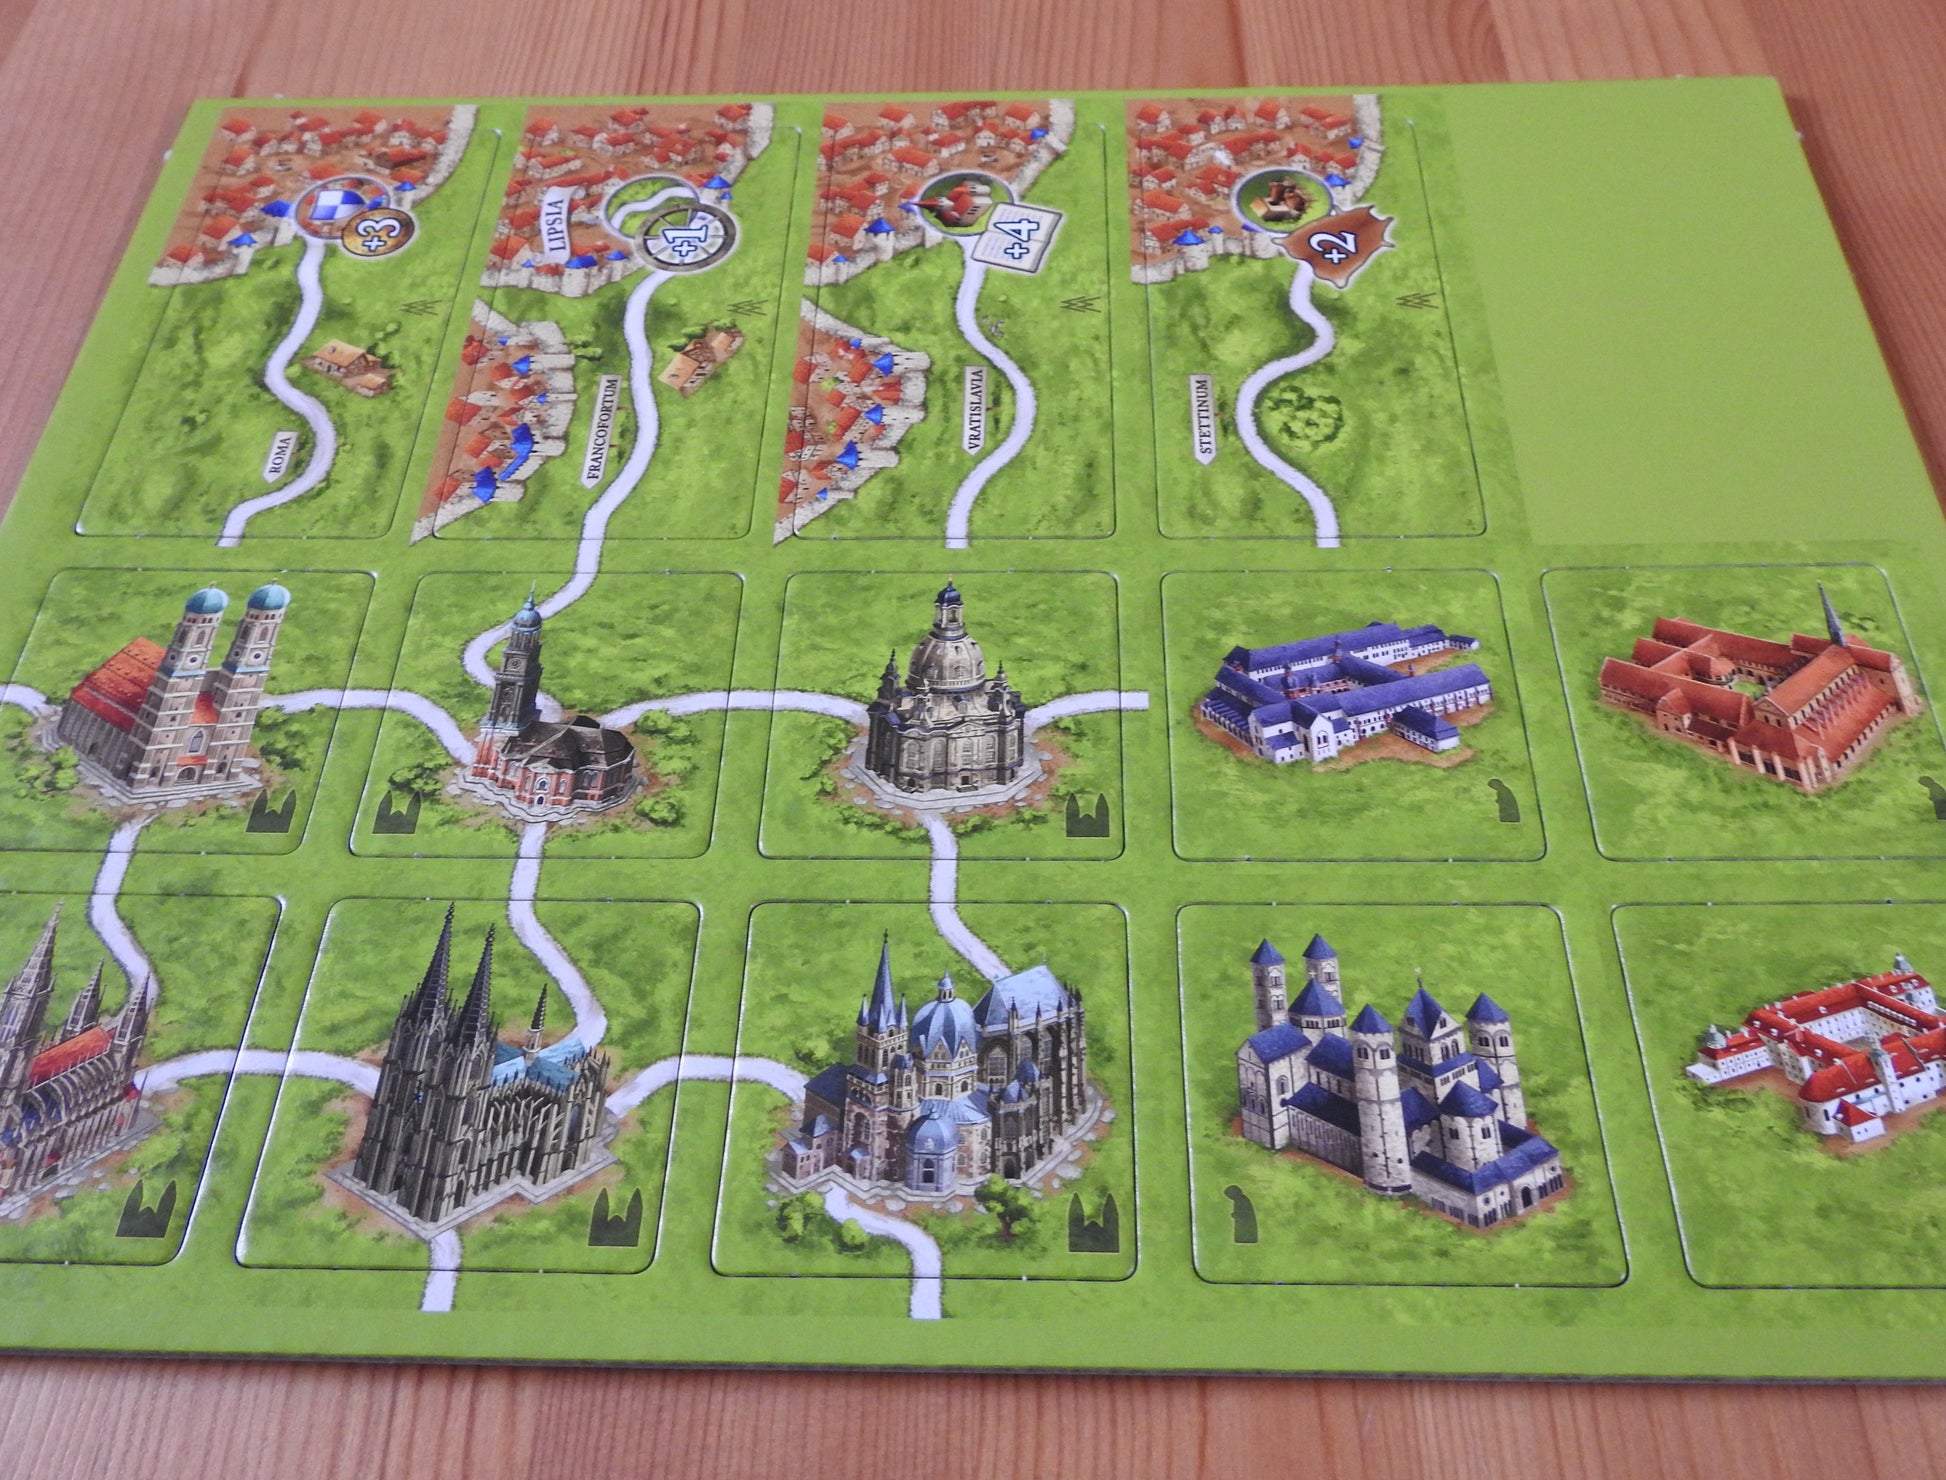 Closer view of the sheet that includes the Markets of Leipzig and German Cathedrals tiles, as well as 4 German Monasteries tiles in this 4 Mini Expansion Bundle for the Carcassonne board game.